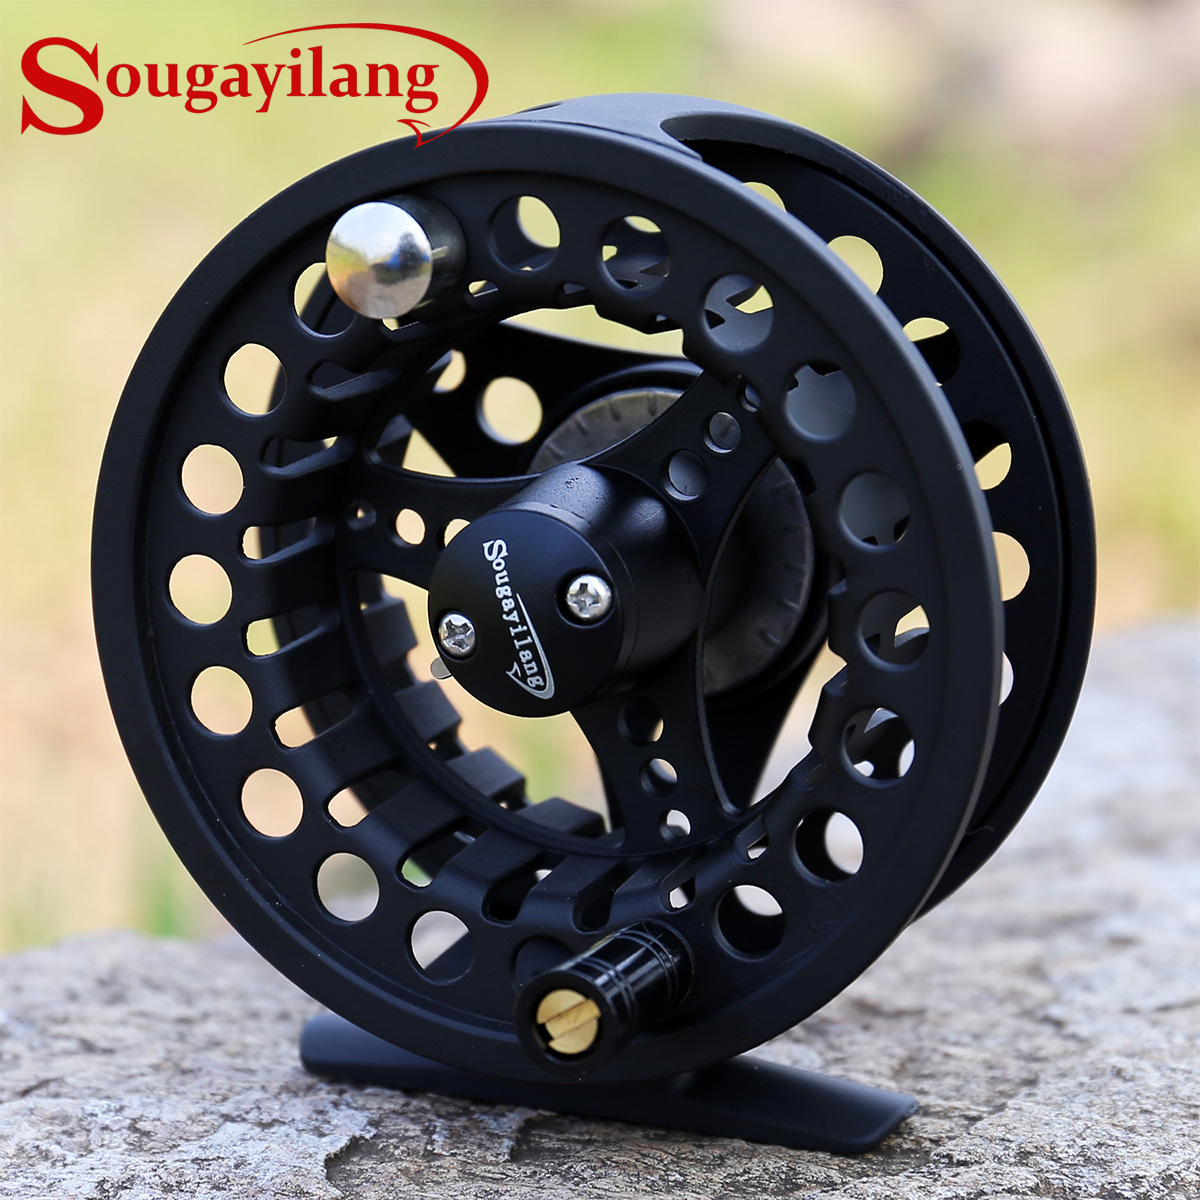 Sougayilang Large Arbor Fly Fishing Reel, Crosswater Reel, 5/6 Left And  Right Hand Retrieve Smooth Drag System